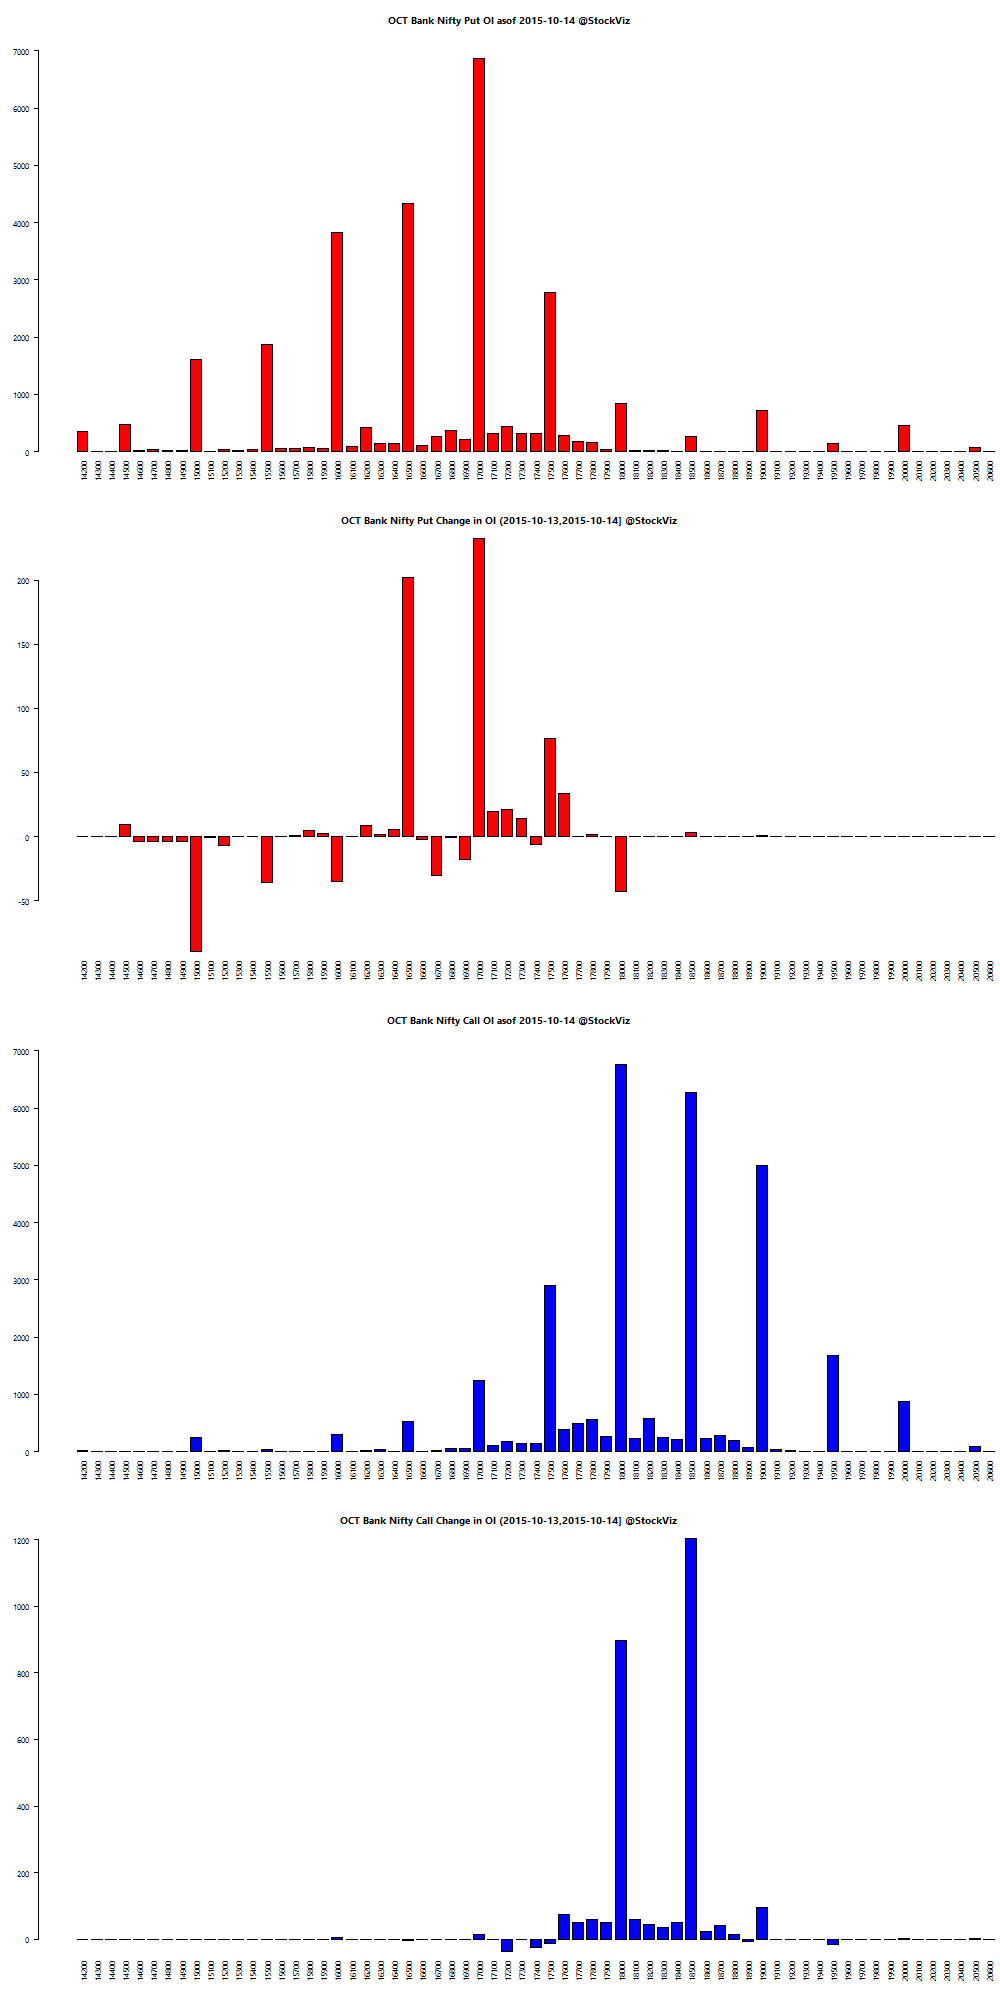 OCT BANKNIFTY OI chart